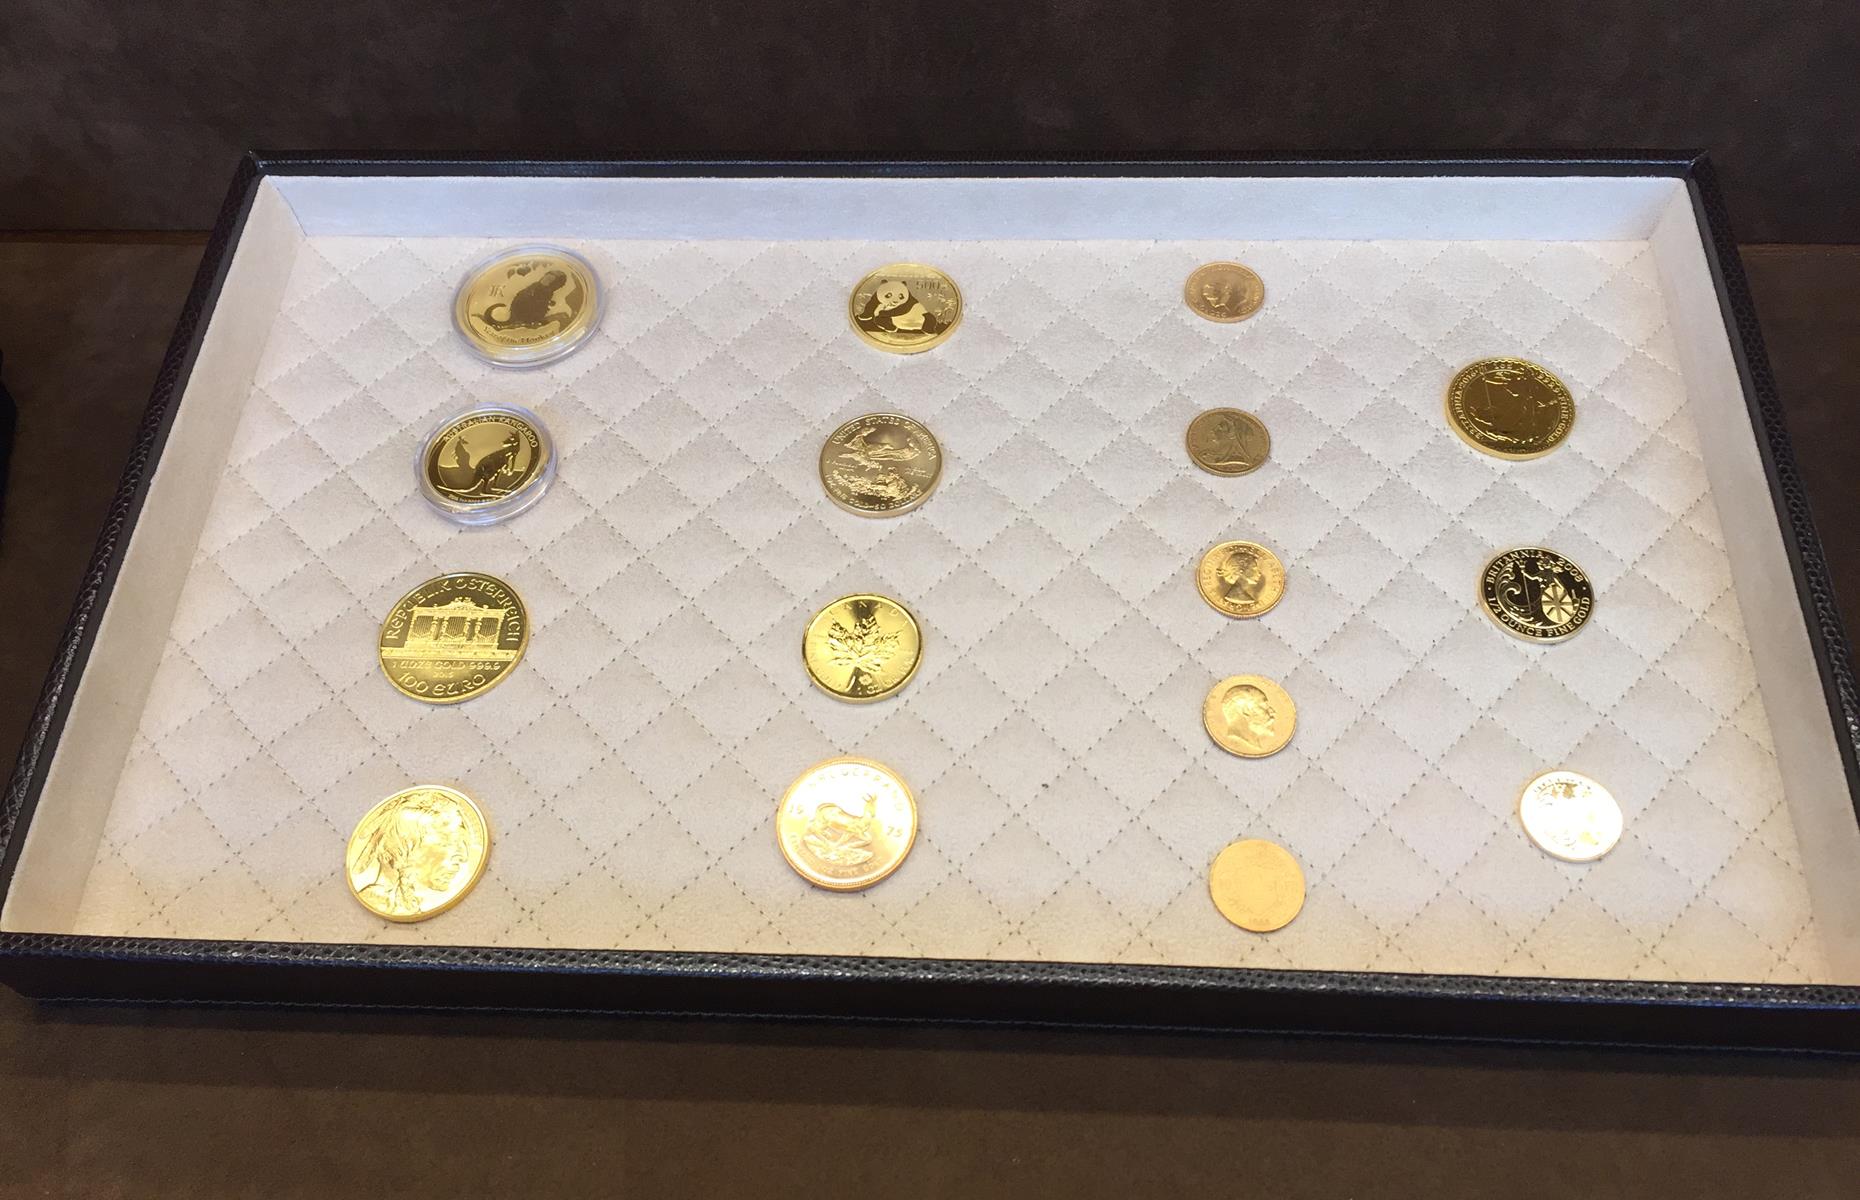 Why is the premium higher on small gold coins?